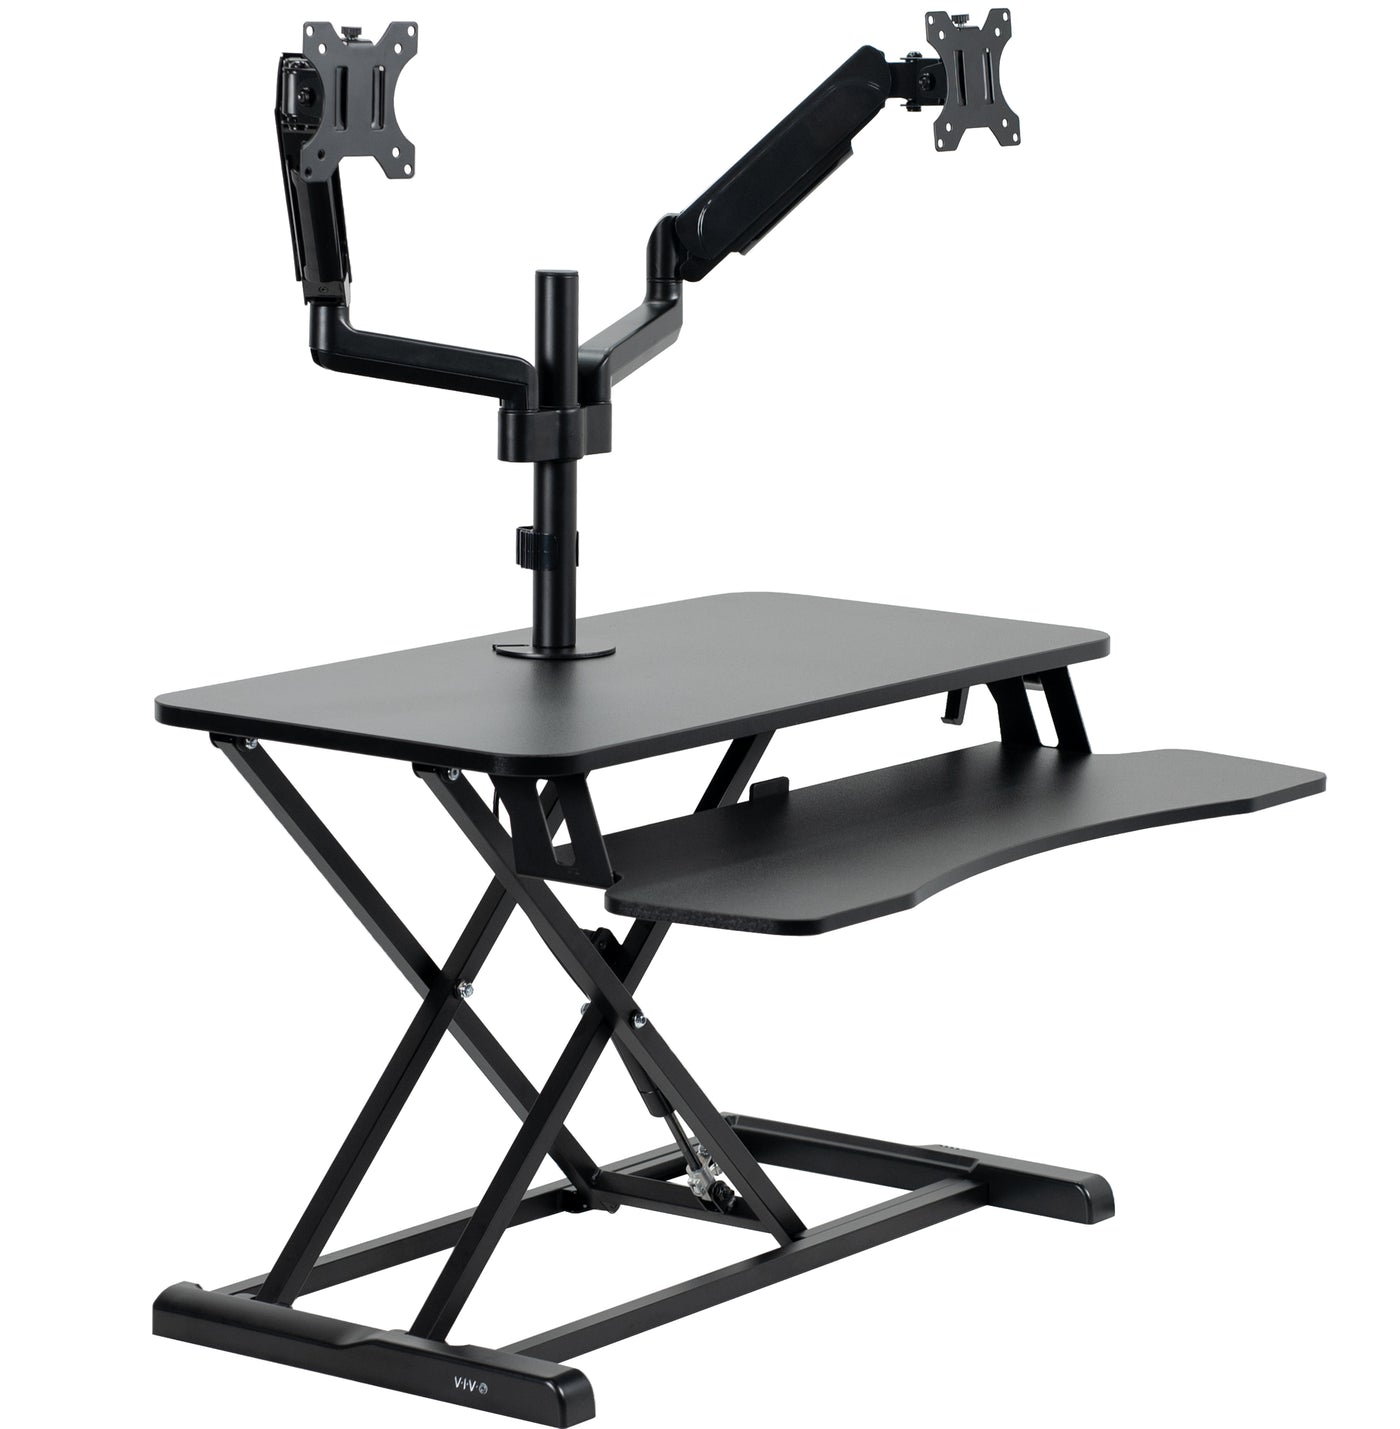 Height adjustable desk riser with articulating pneumatic dual monitor mount.